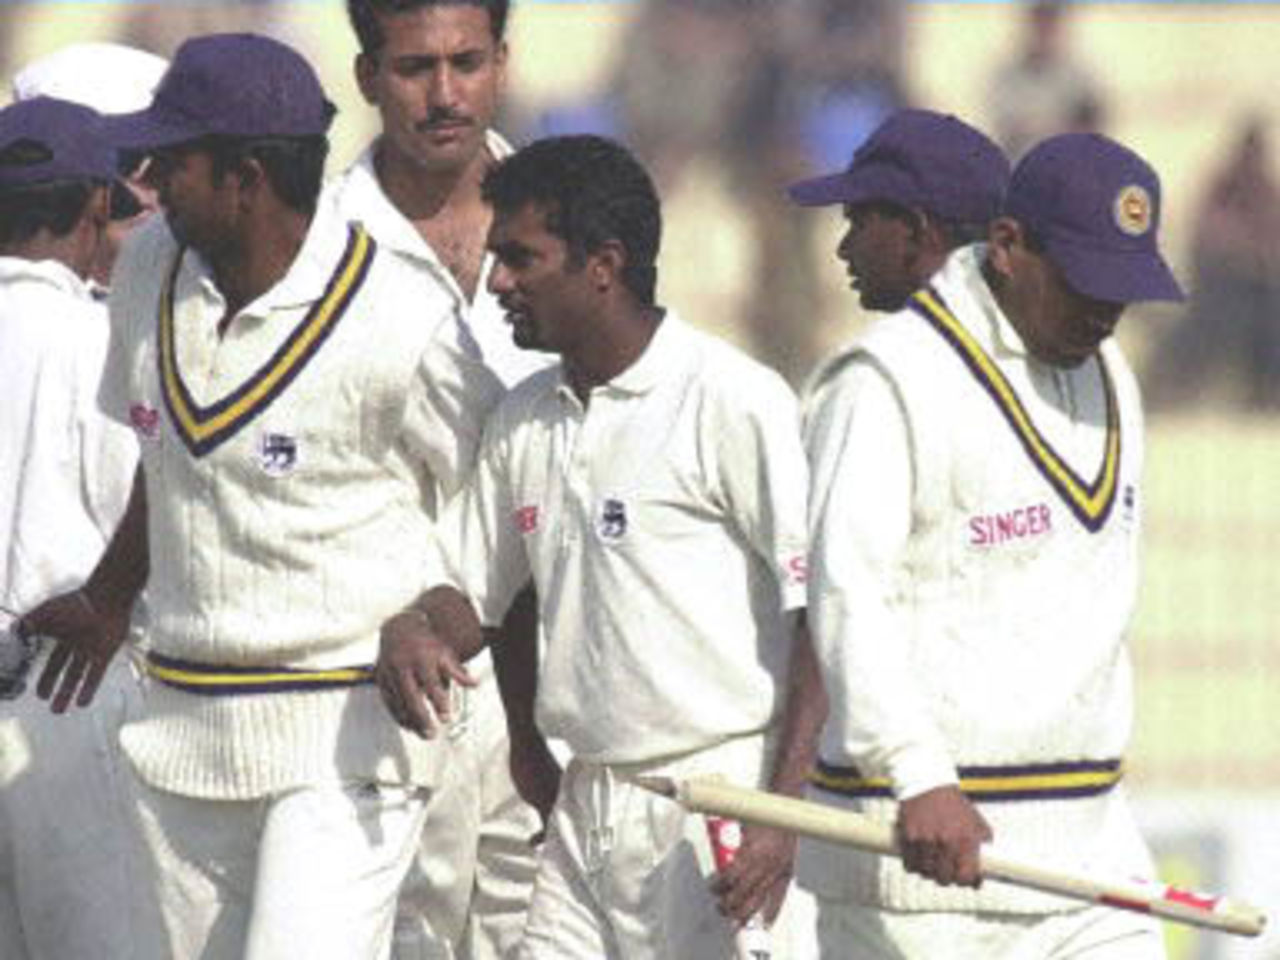 Sri Lankan off-spinner Muttiah Muralitharan (C) leaves the ground with other teammates after winning the 2nd Cricket Test against Pakistan in Peshawar, 09 March 2000. Muralitharan took 6-71 while collected ten wickets in the match and was declared Man of the Match. Sri Lanka defeated Pakistan by 57 runs and won the three Test series by 2-0.